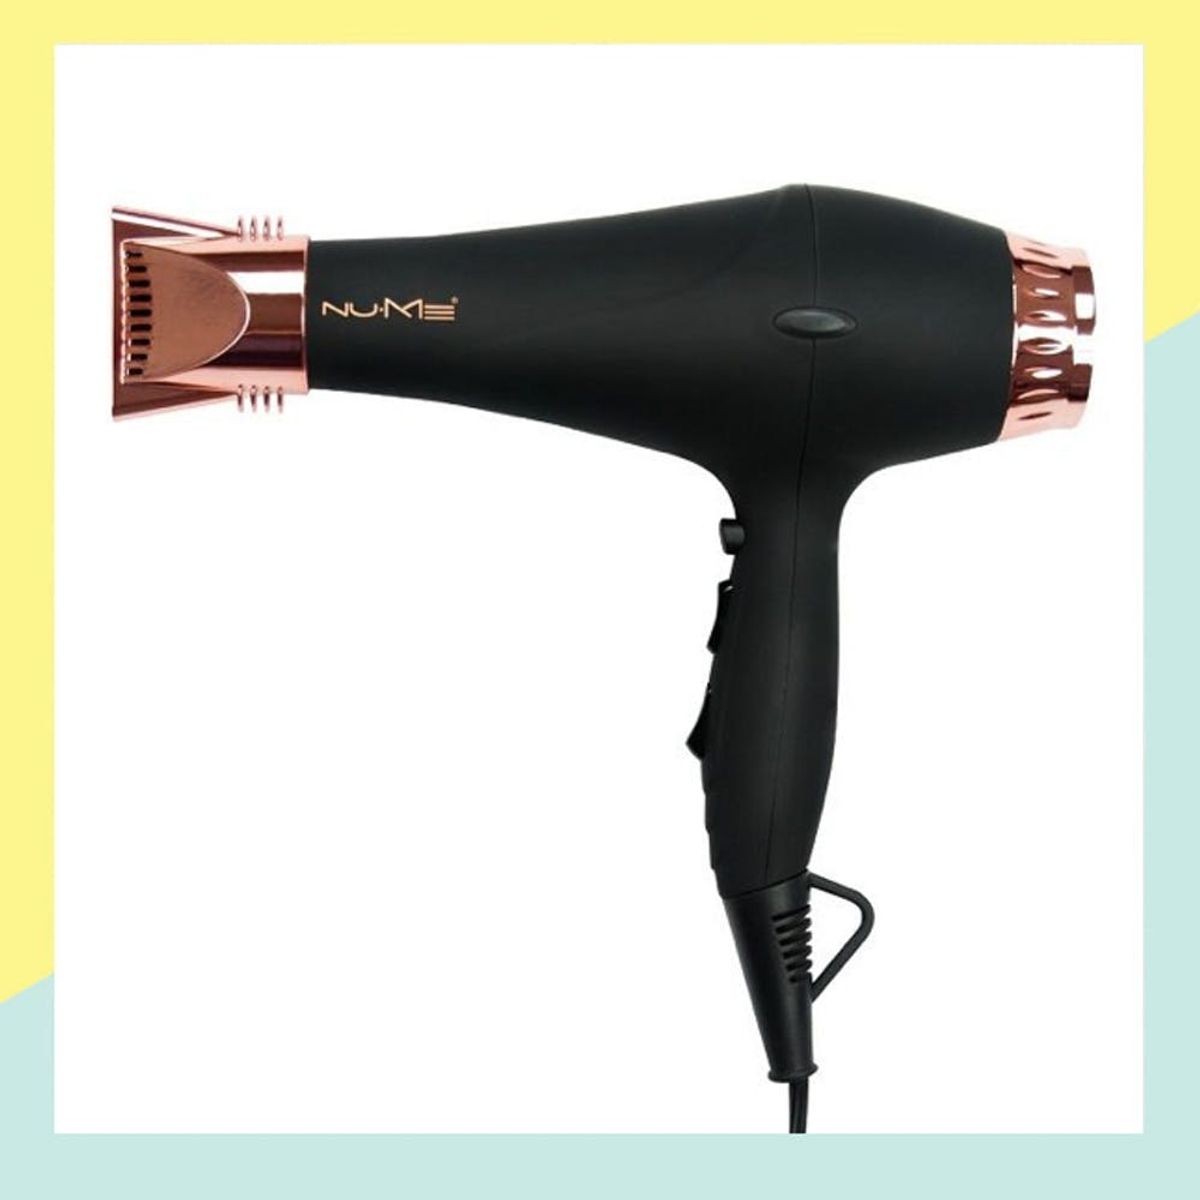 8 Hair Dryers That Will Give You a Salon Blowout at Home